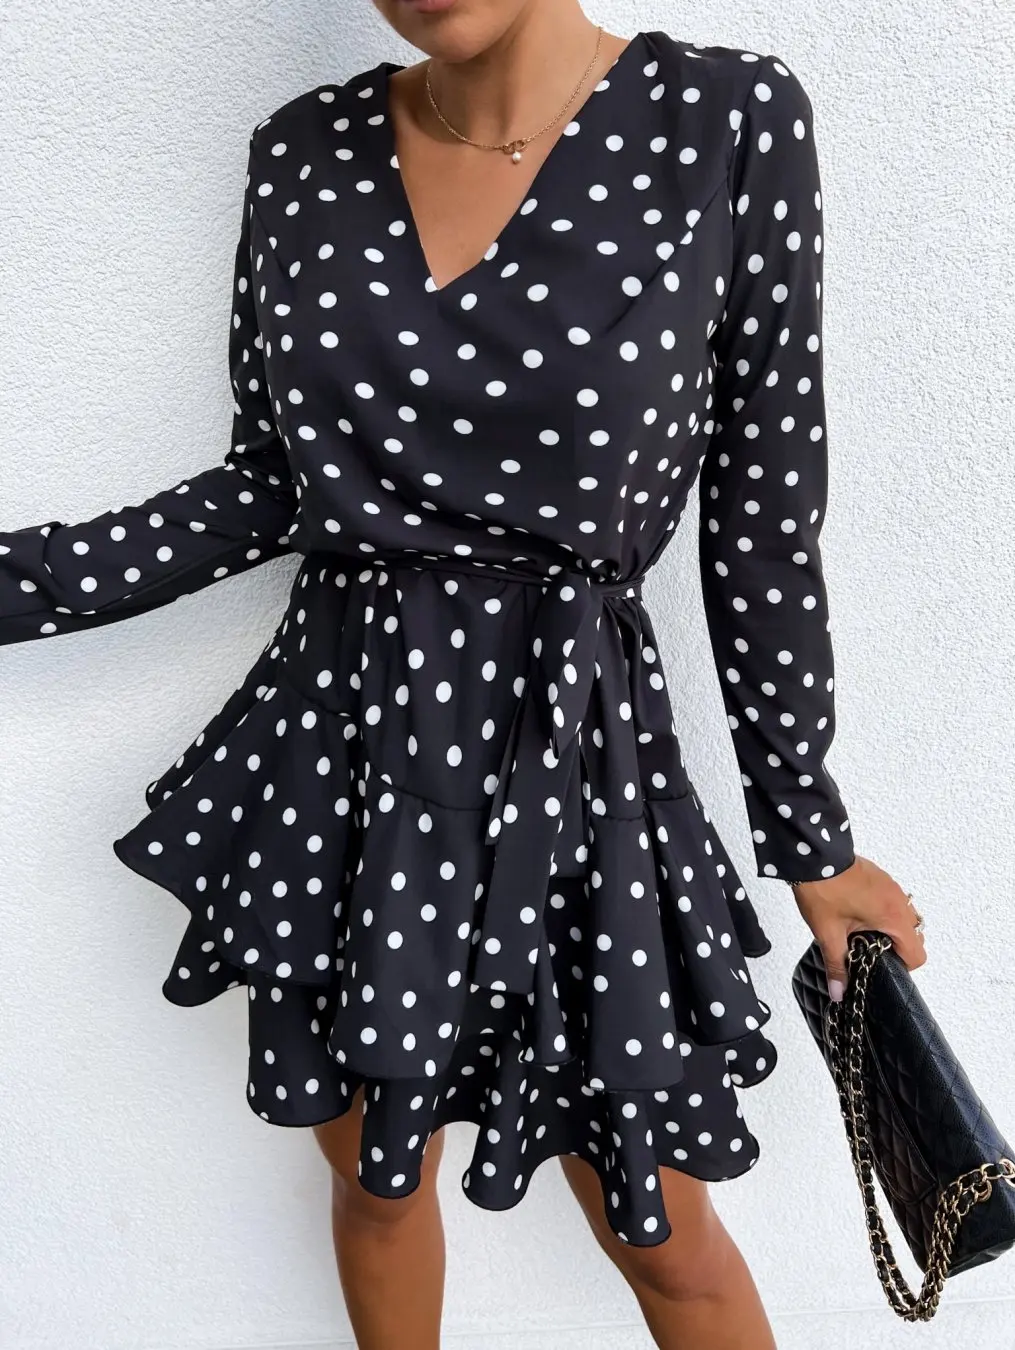 

Women's Clothing New Sexy Fashion Casual Commuting Versatile Beach Style Leopard Print V-neck Dress